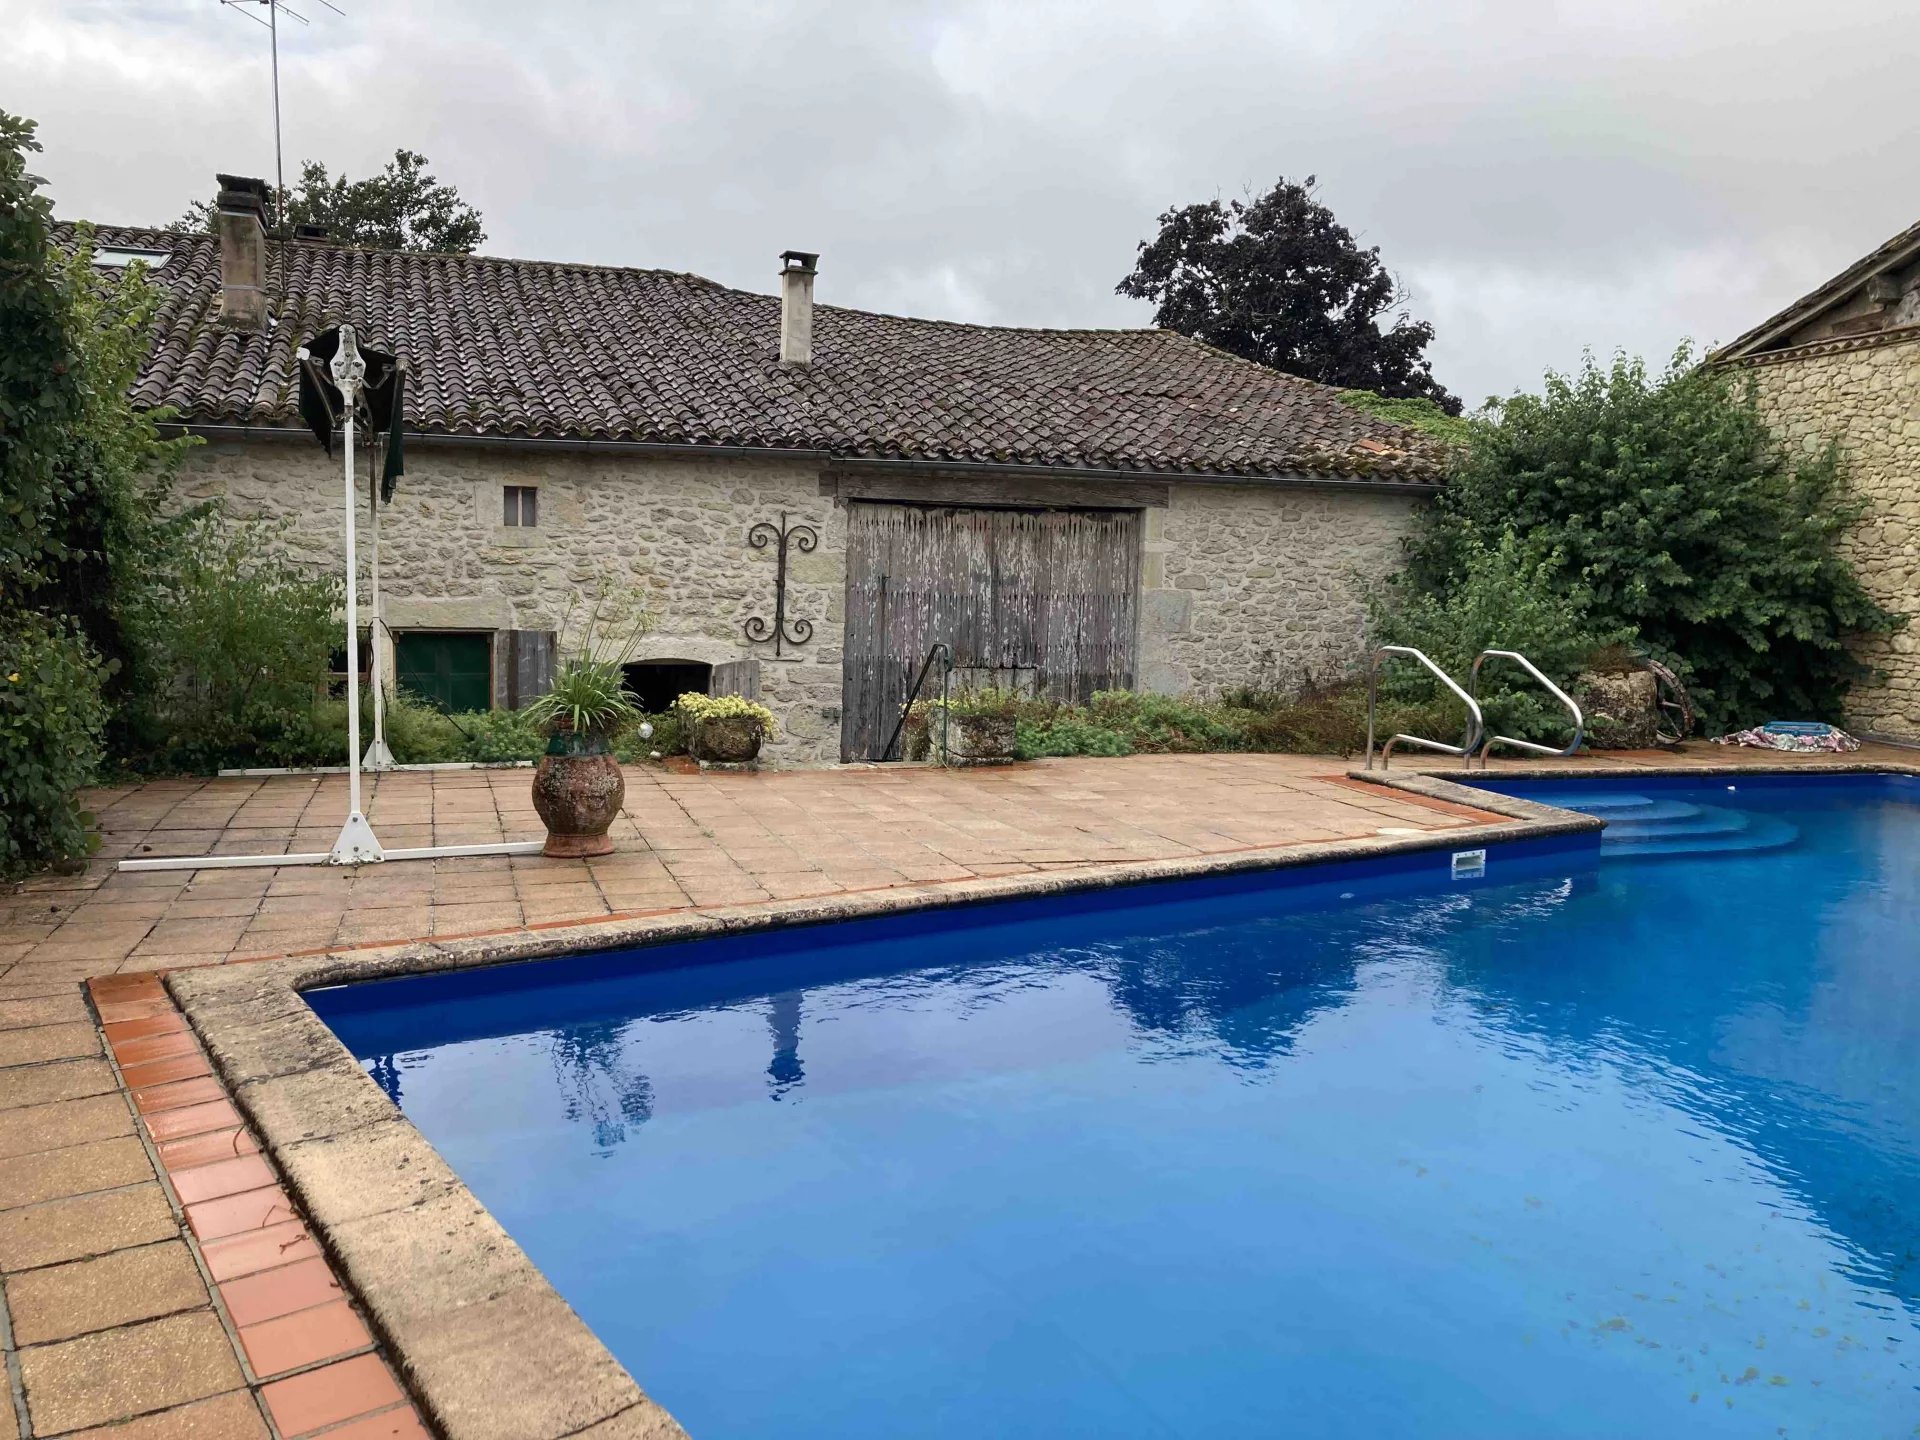 Character filled house, with good views, barn and pool